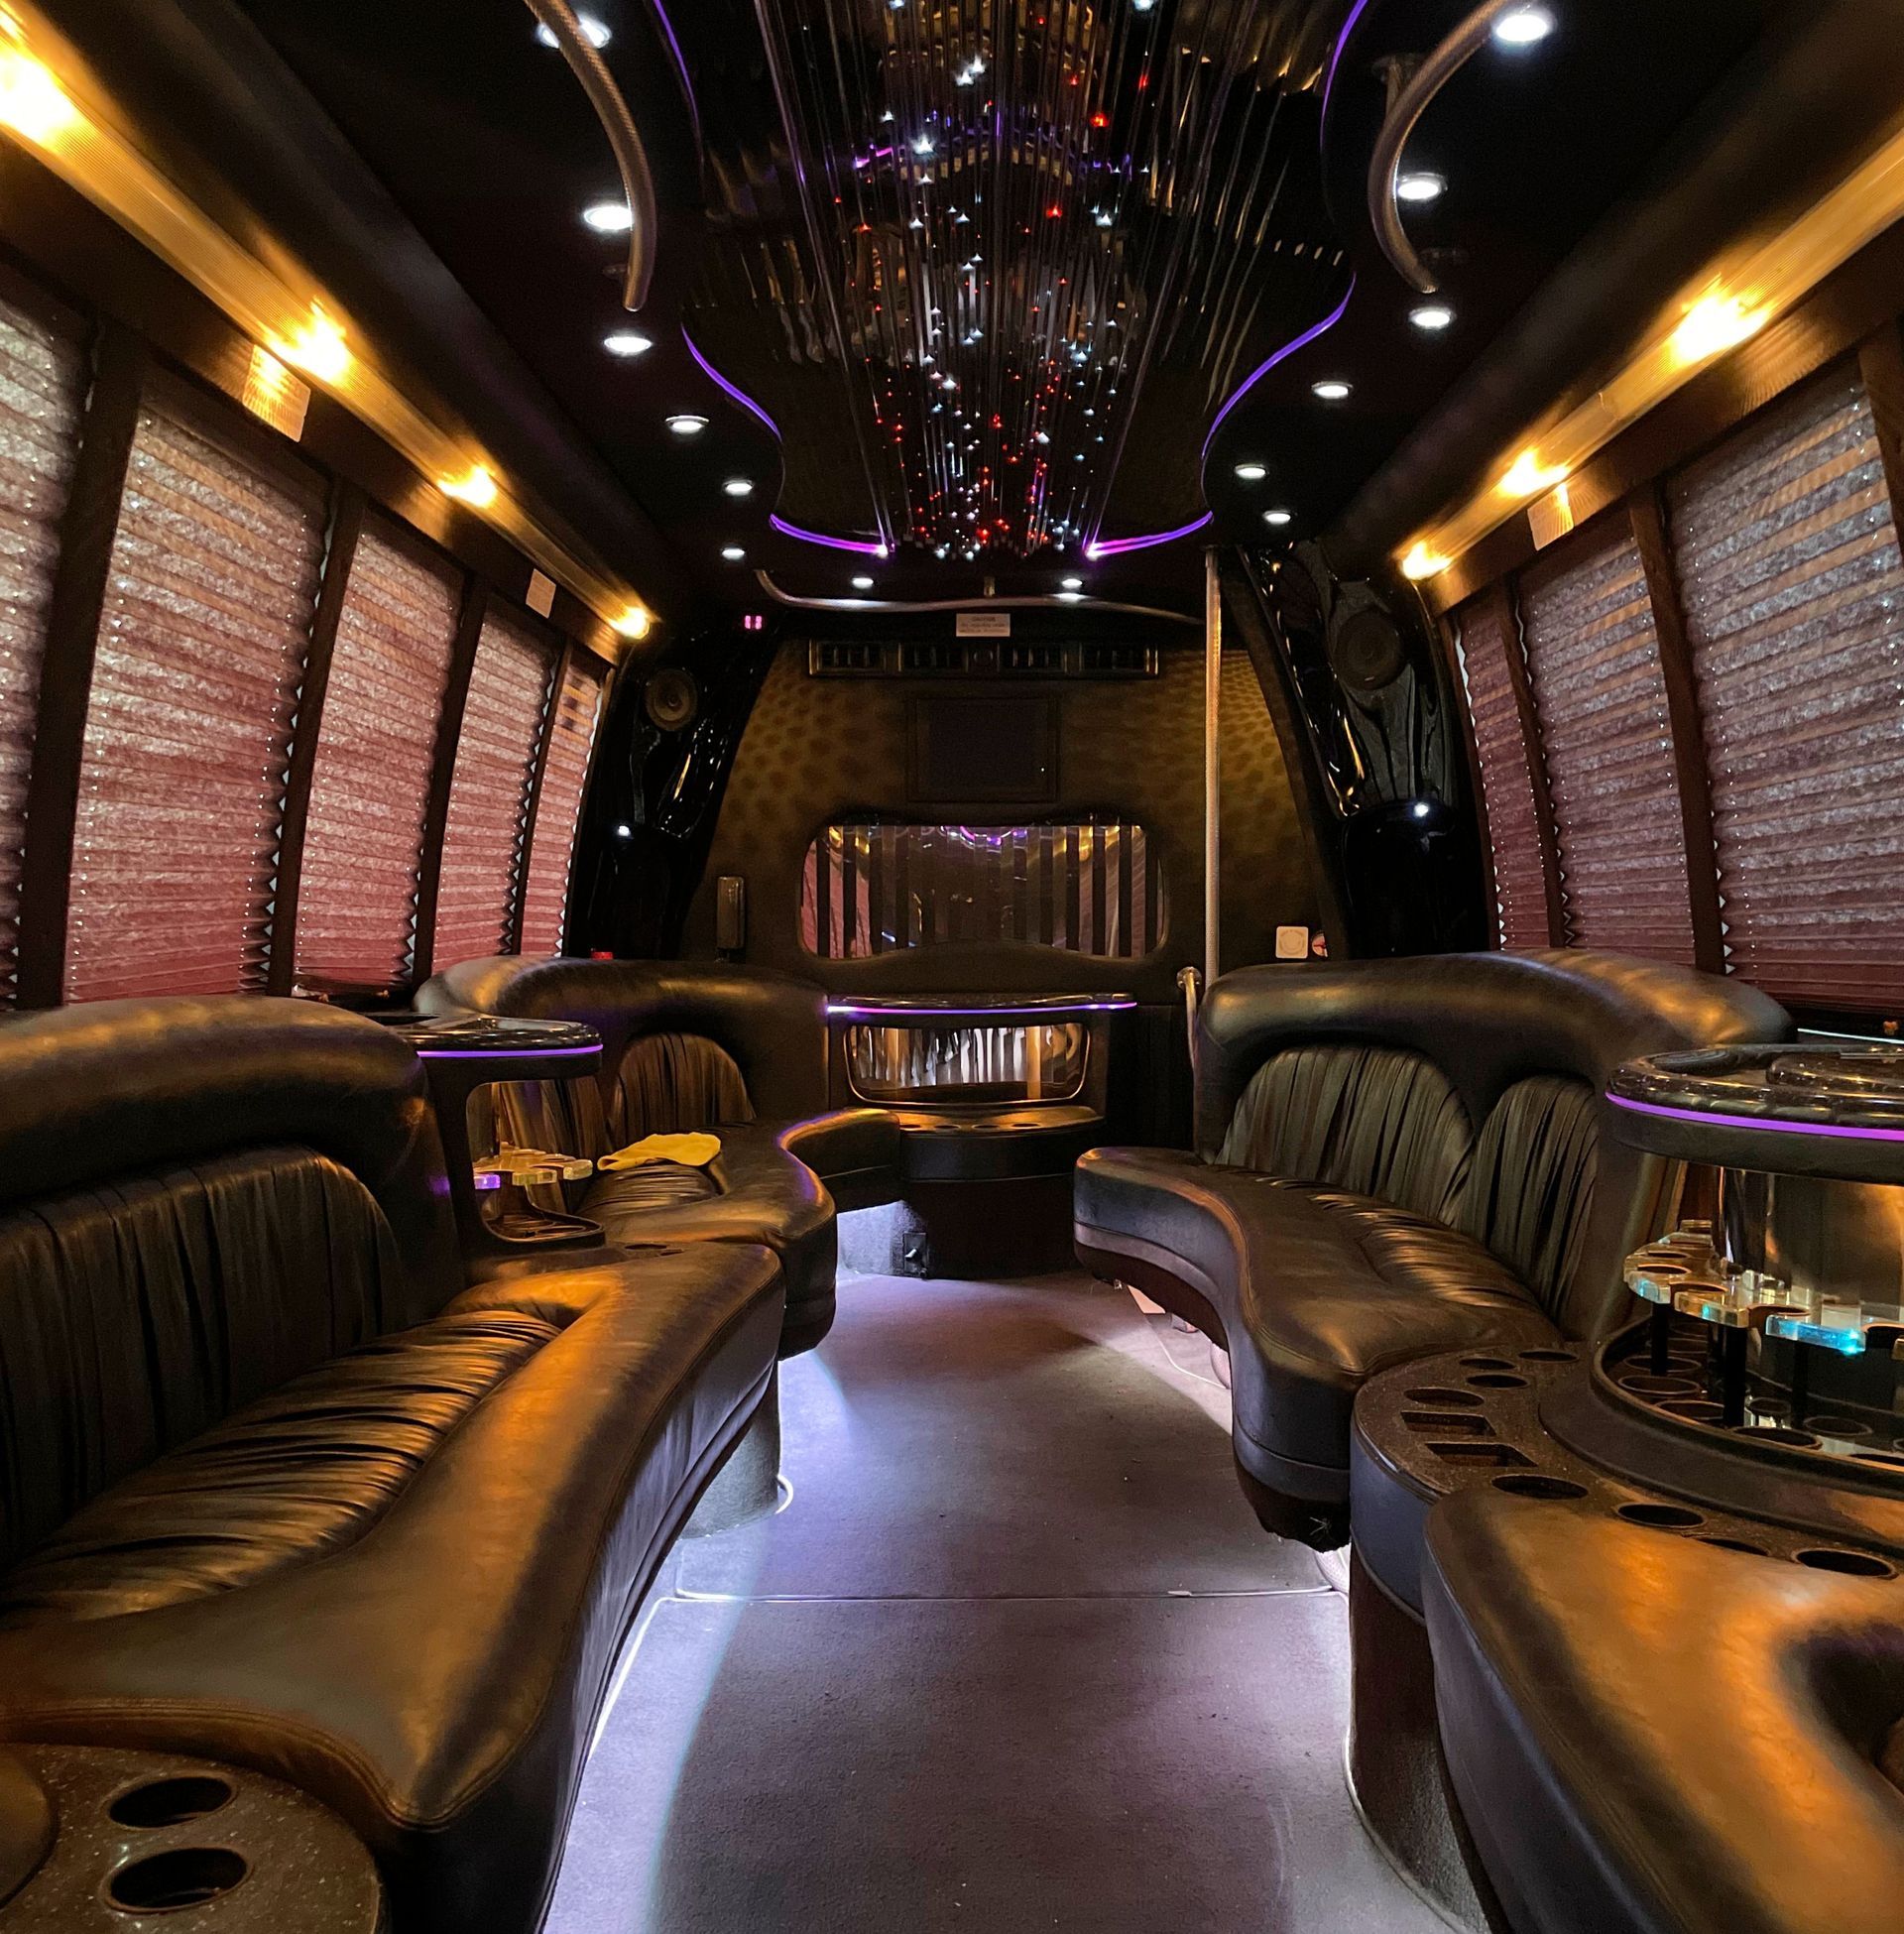 Limo To Go Krystal Coach 24 passenger white party bus interior daytime view with plush custom curved seating and mirrored ceiling